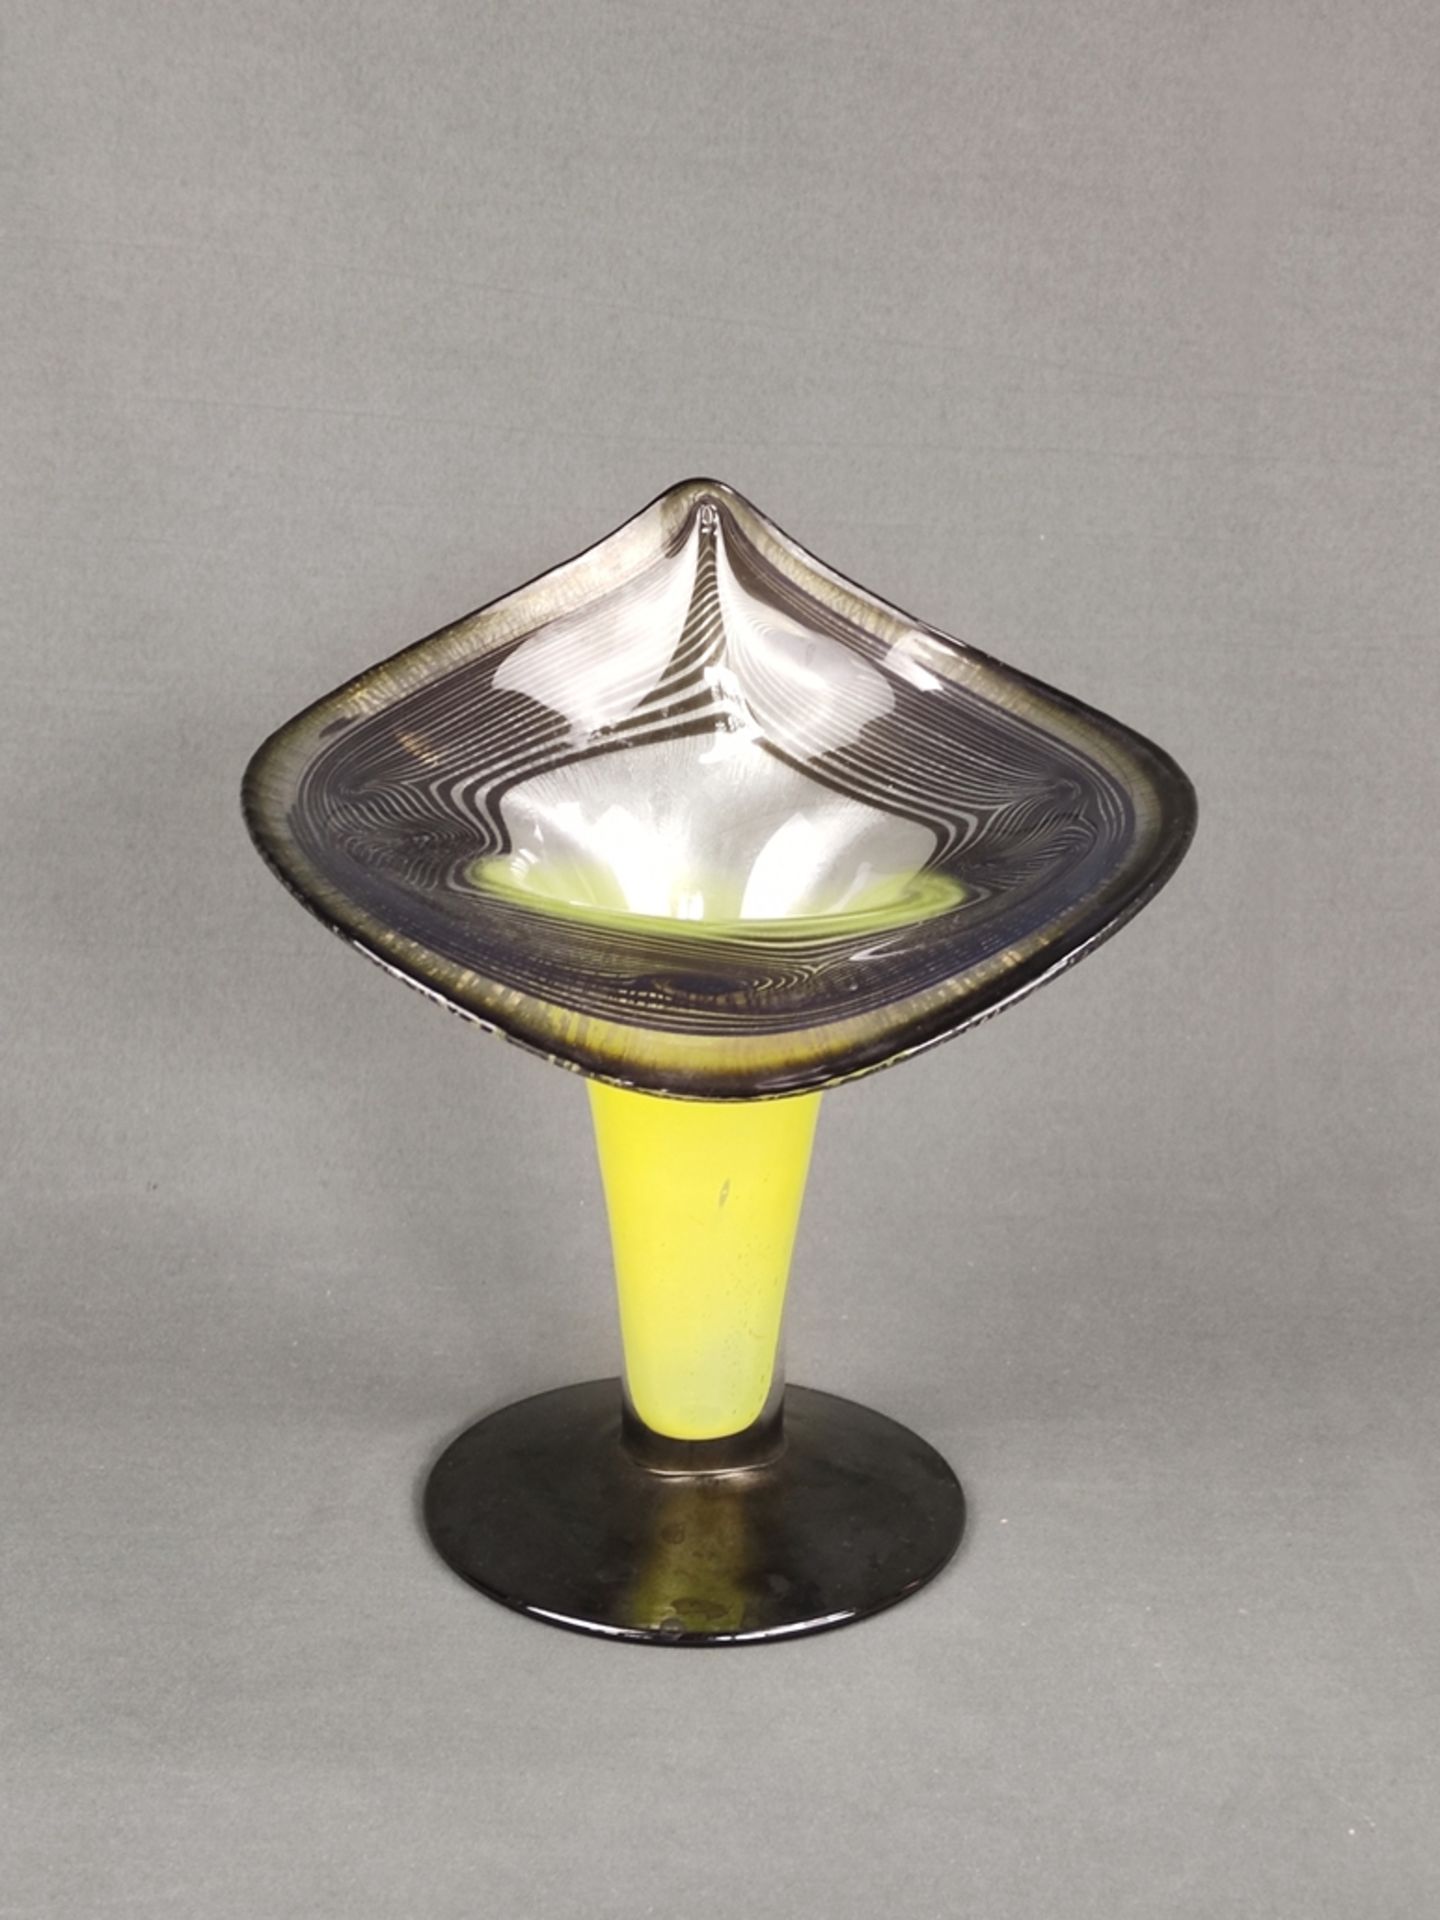 Vase Eisch, round base, goblet-shaped body with flared rim, signed "Eisch" and dated "77", height 2